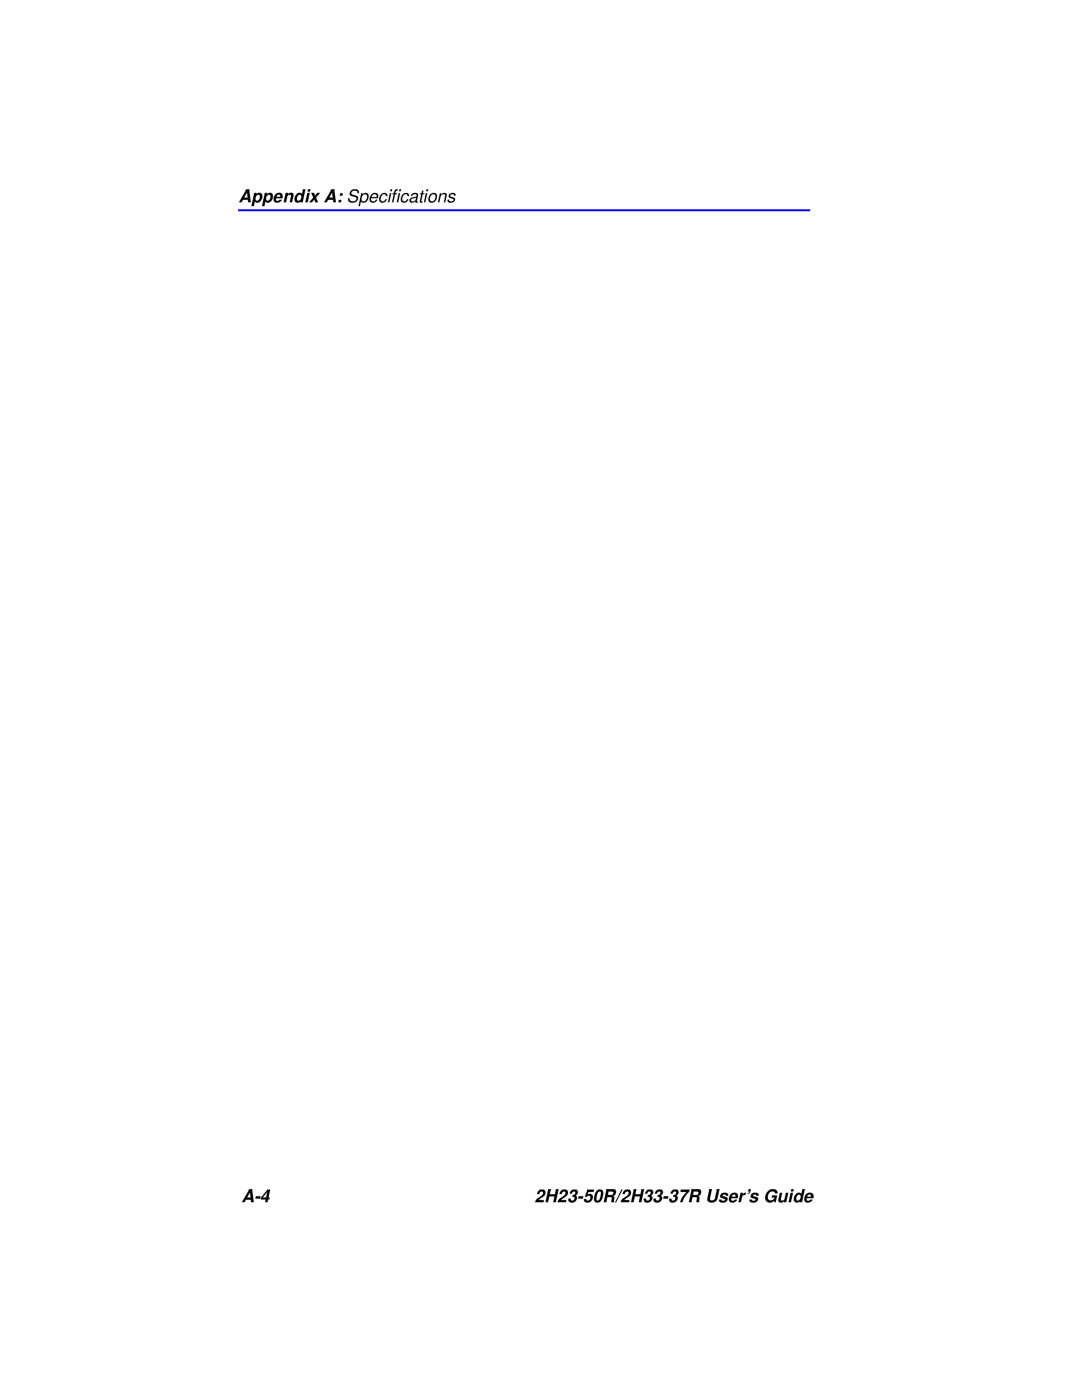 Cabletron Systems manual Appendix A Speciﬁcations, 2H23-50R/2H33-37R User’s Guide 